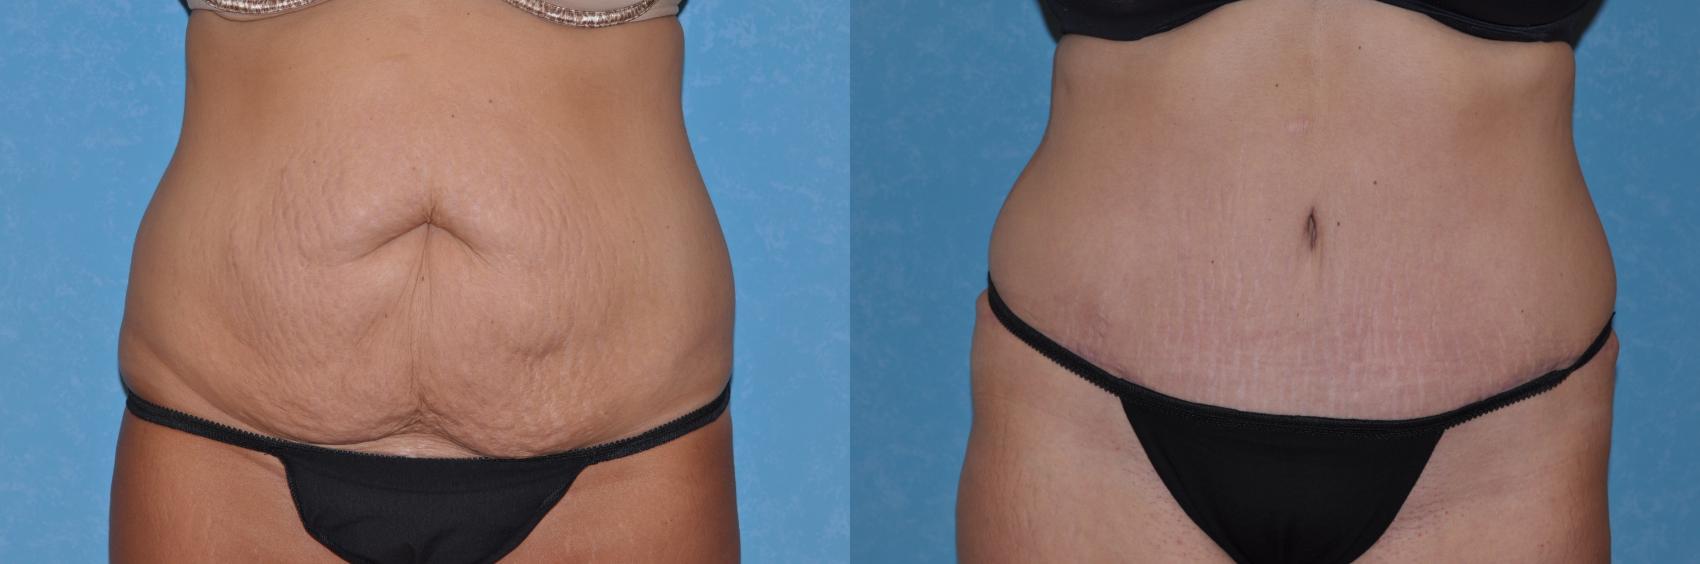 https://images.craigcolvillemd.com/content/images/abdominoplasty-102-front-detail.jpg